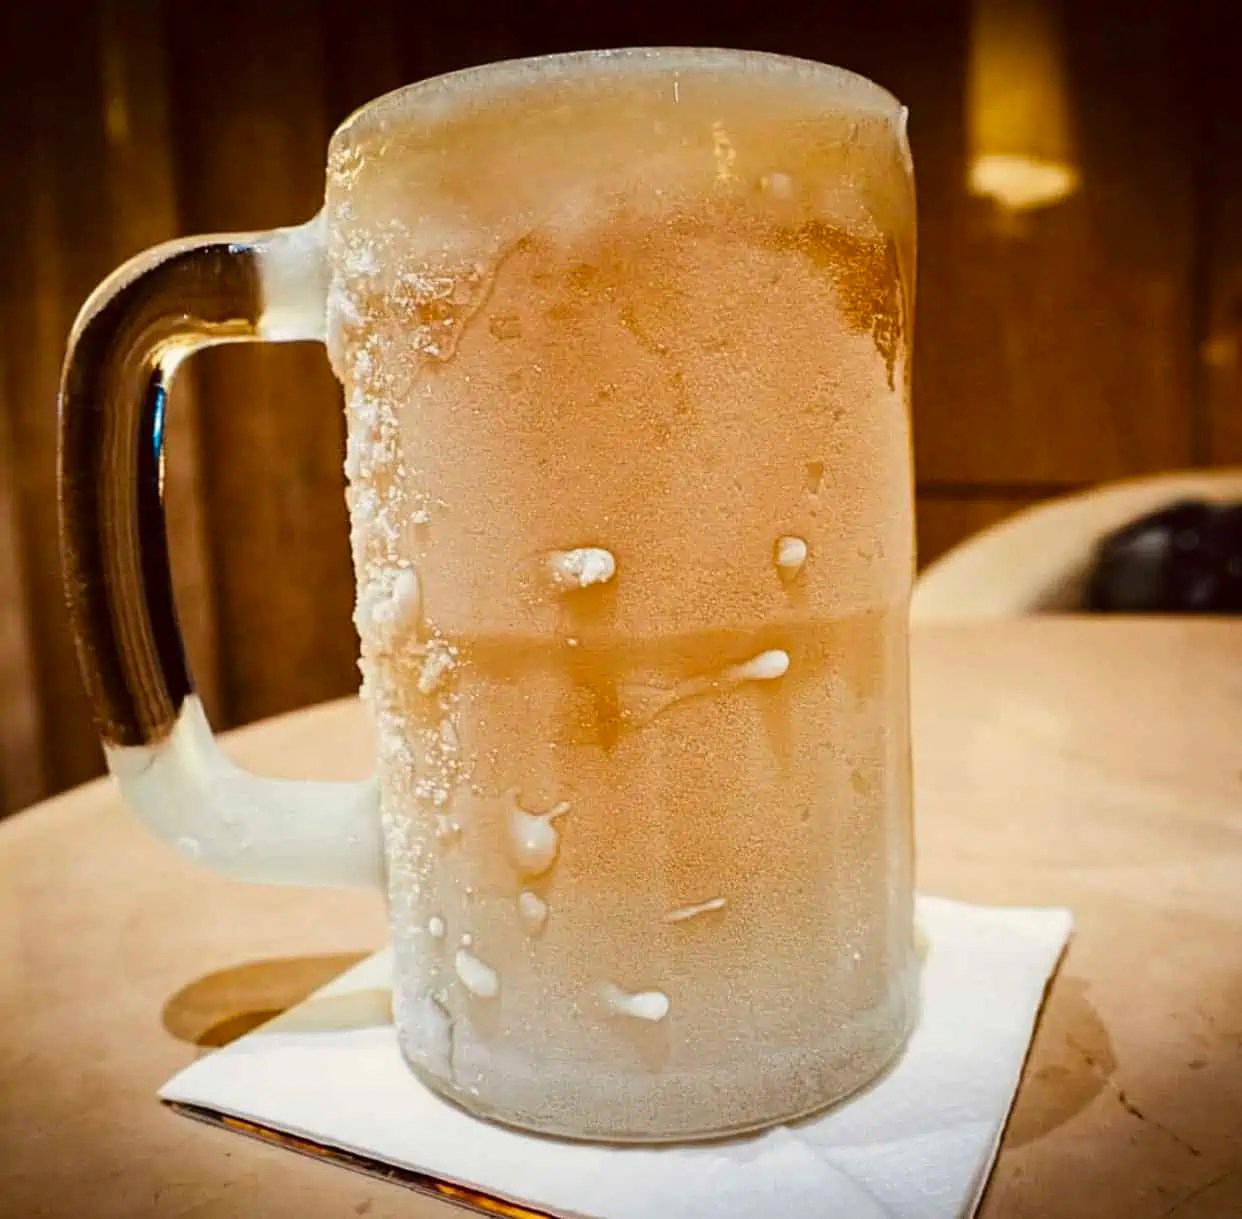 at what temperature does beer freeze